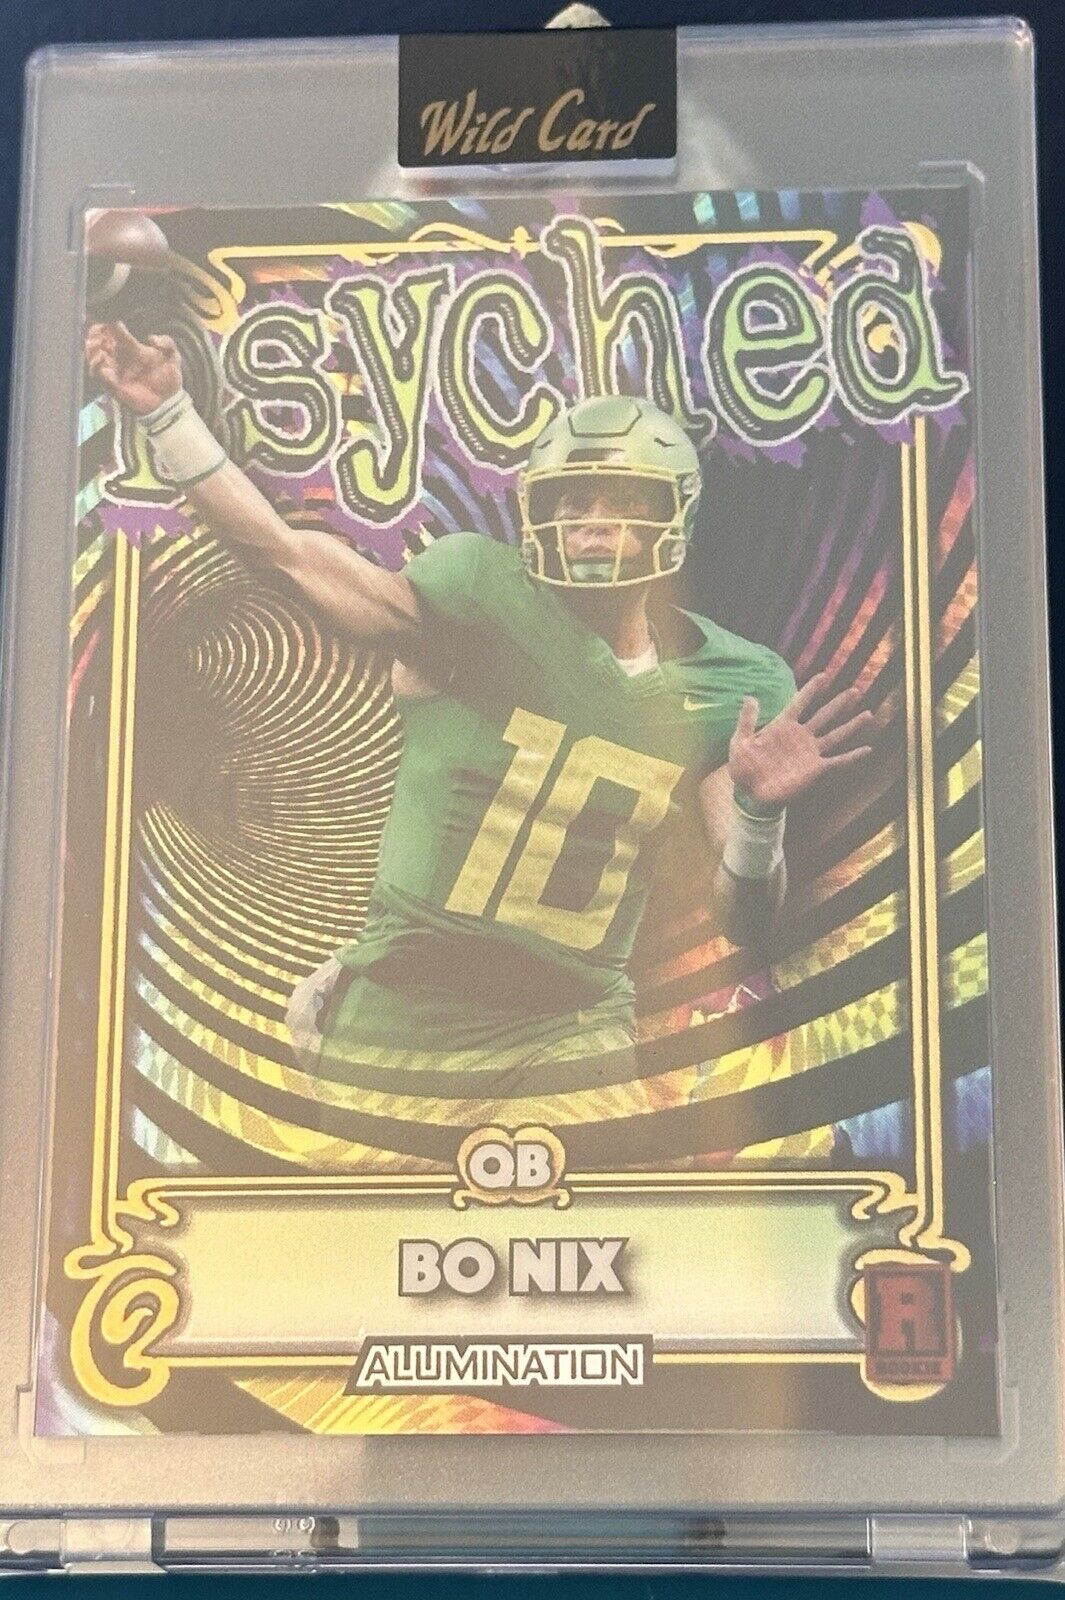 2023 Wild Card Bo Nix Psyched SP 67/75 RC